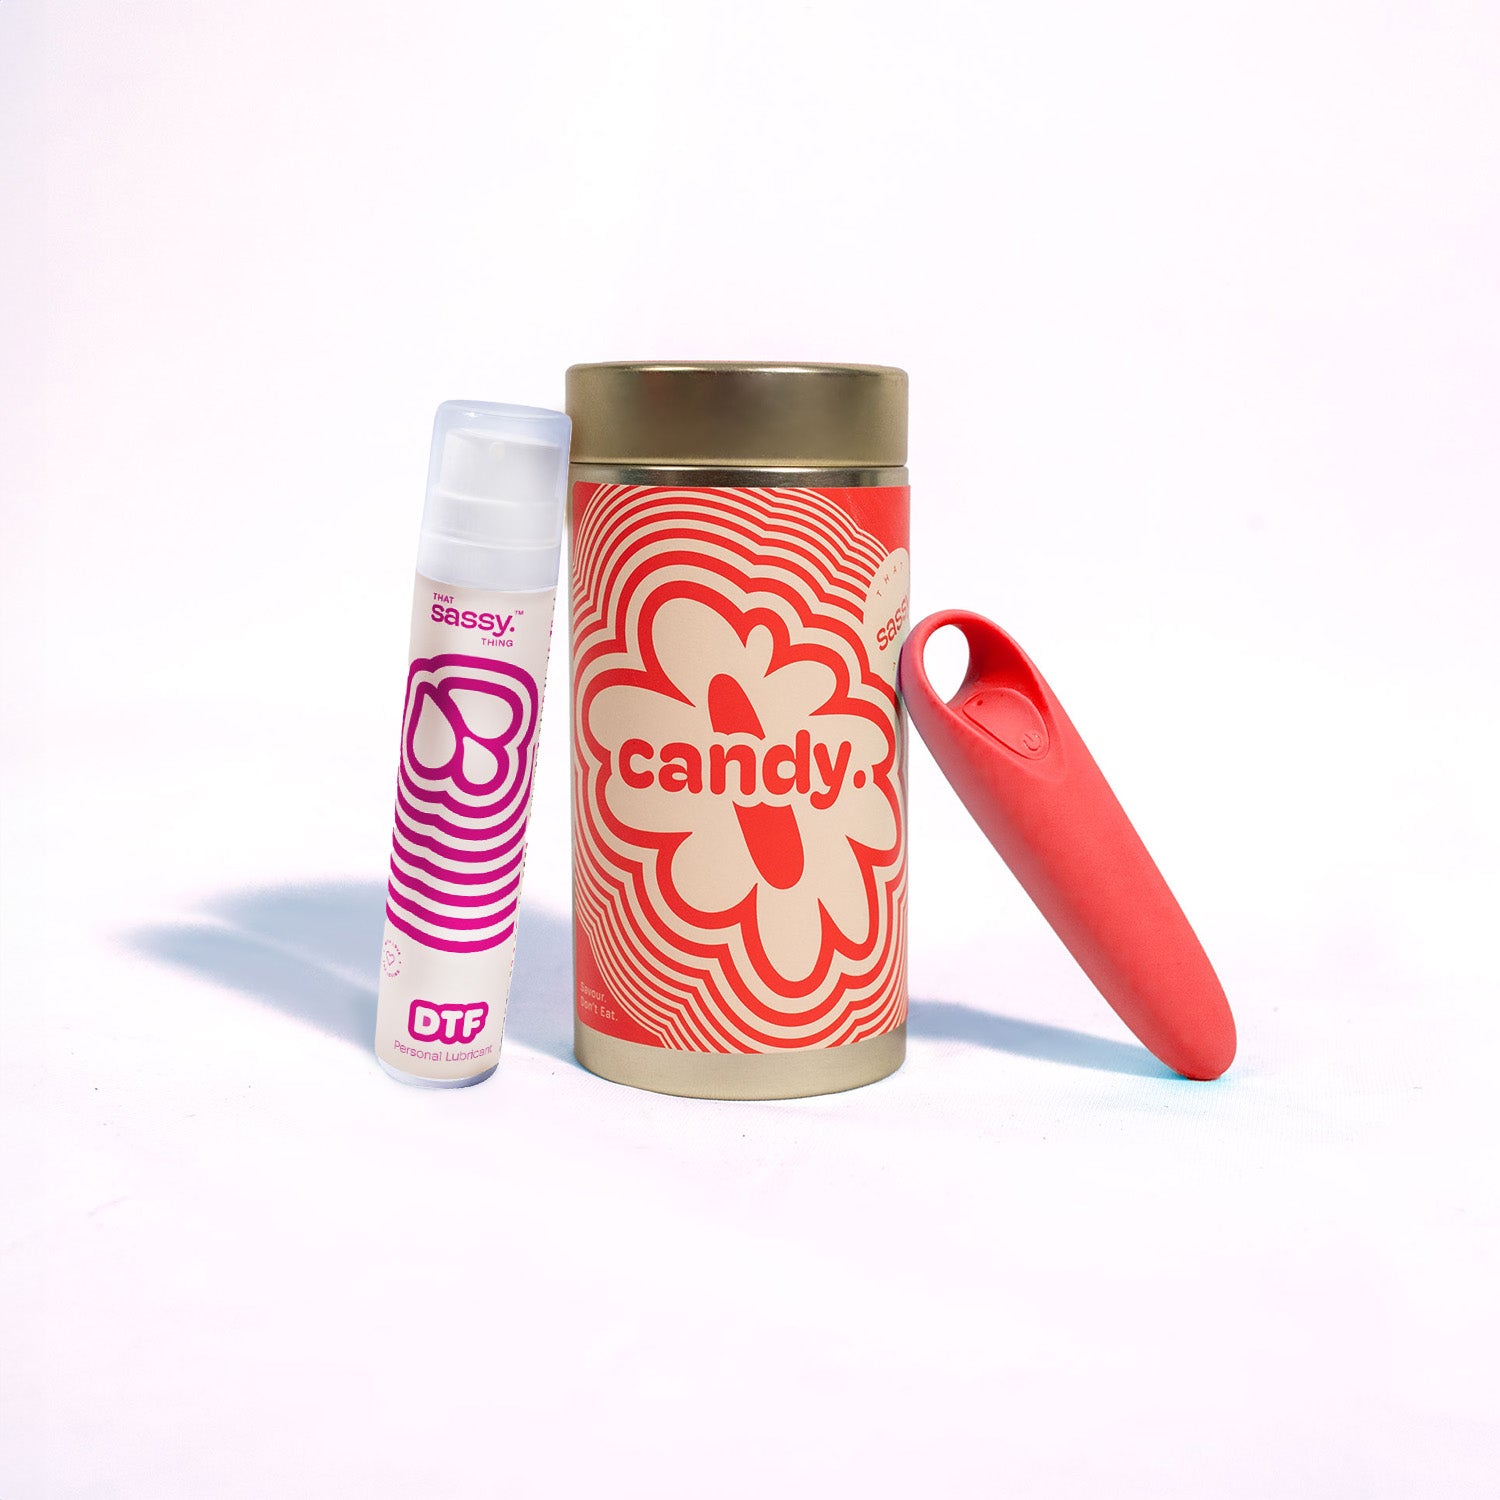 Retro Red Candy Personal Massager Displayed with DTF Aloe-Based Personal Lubrication